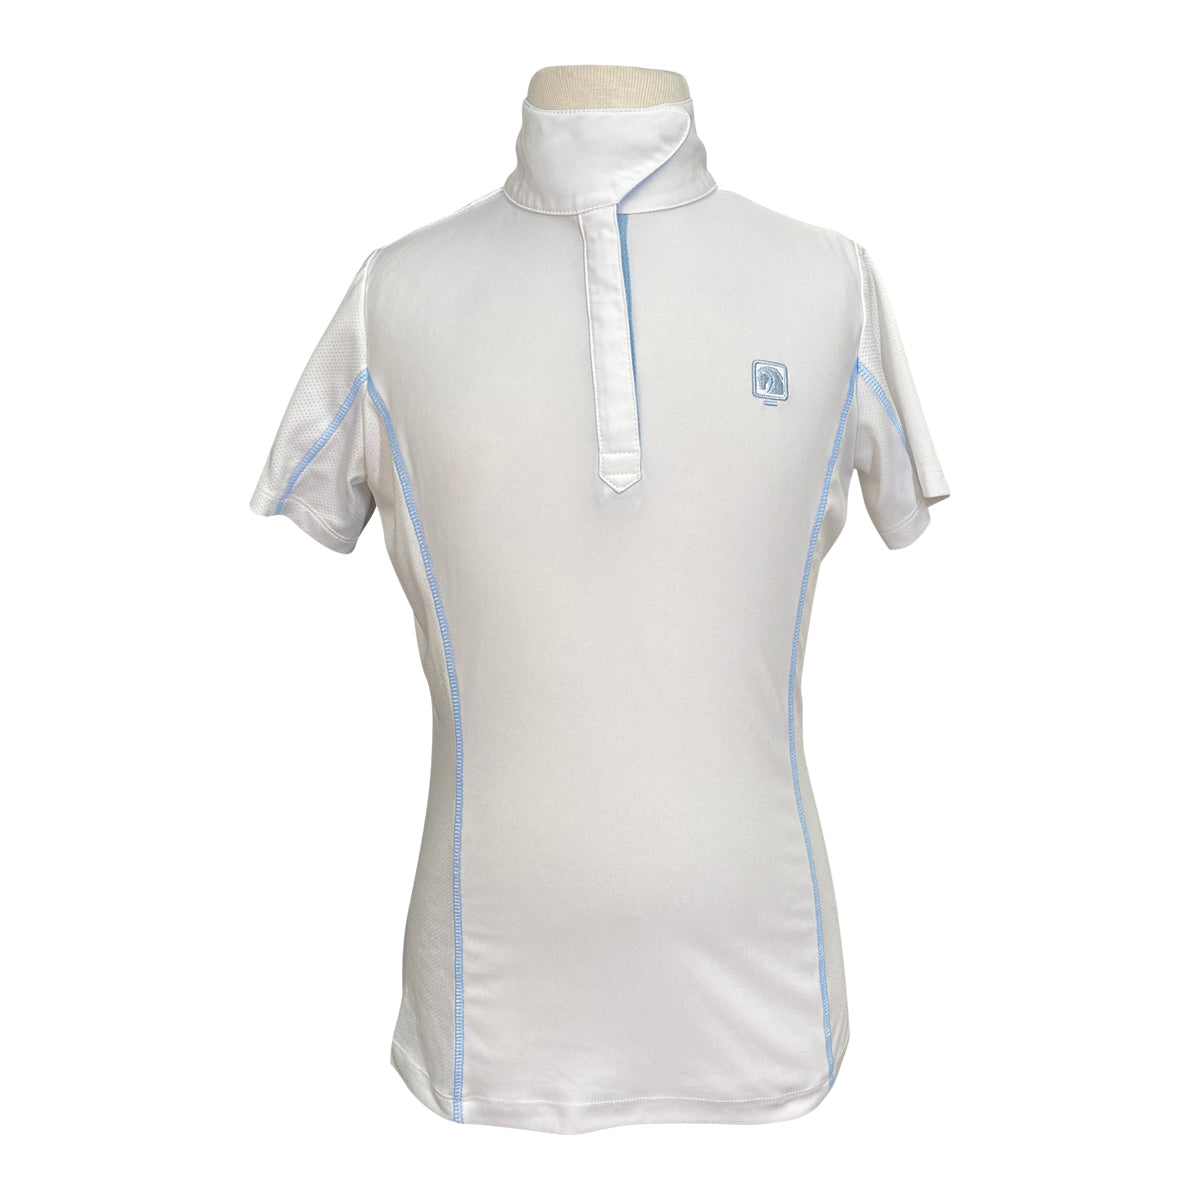 Romfh Competitor Short Sleeve Show Shirt in White/Baby Blu